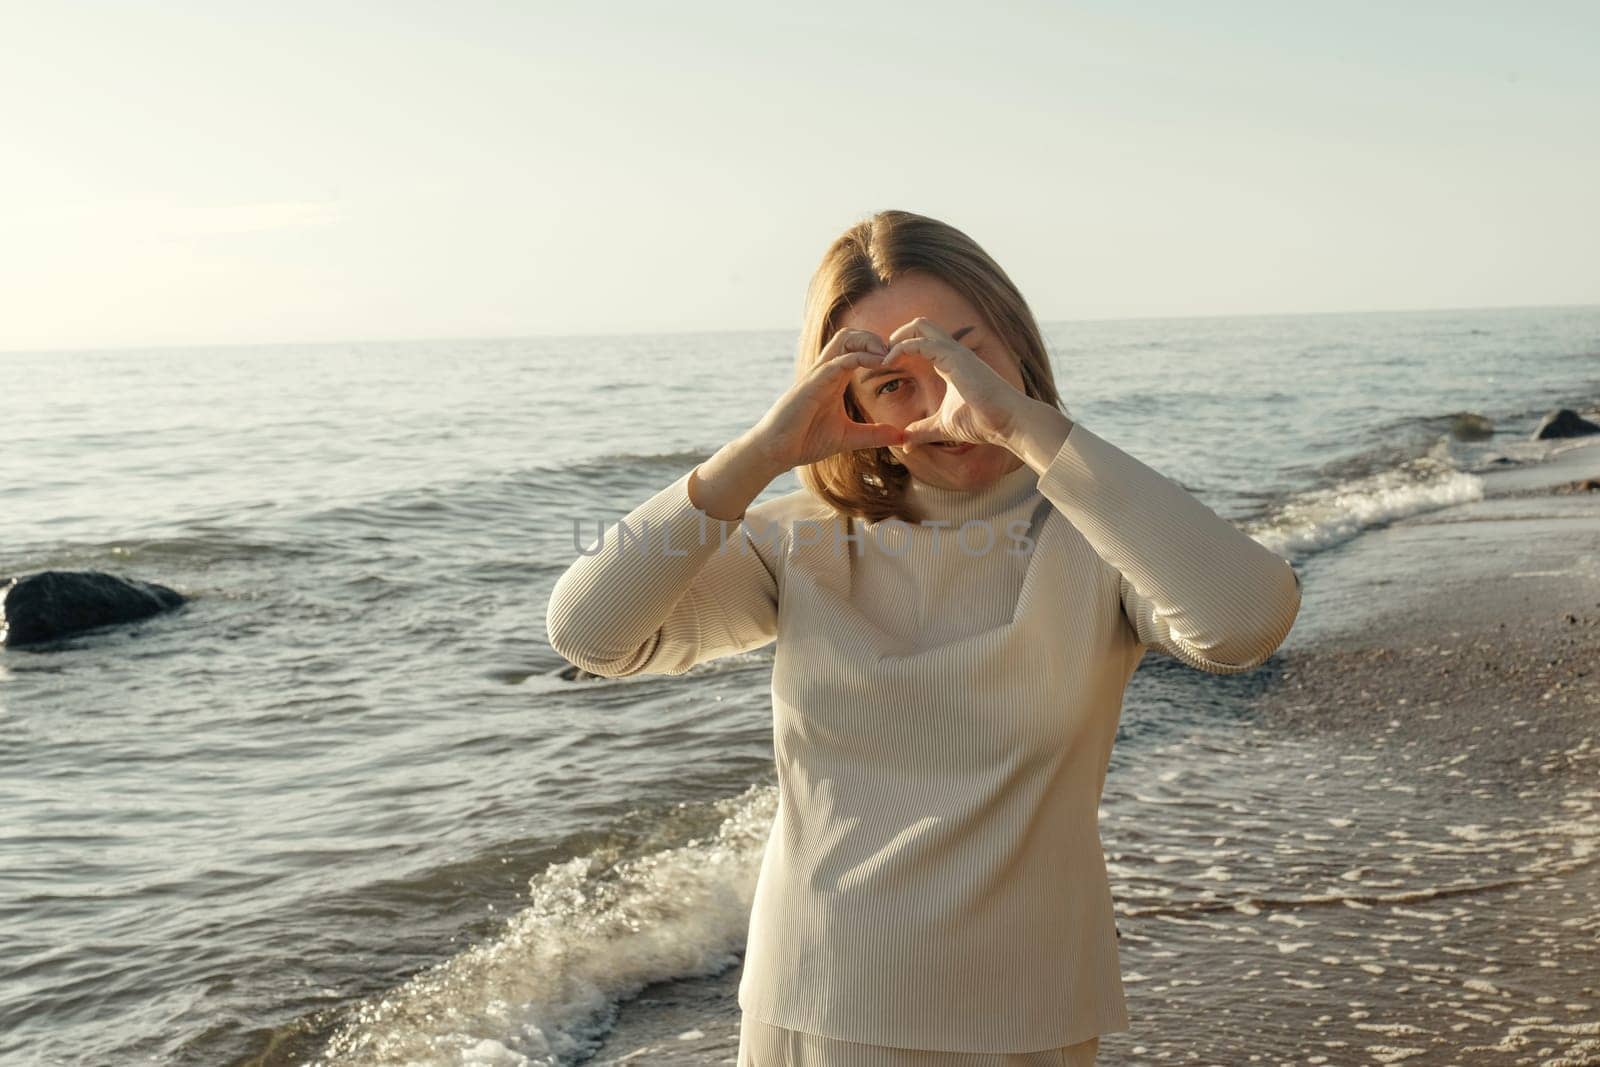 A woman stands on the shore, playfully depicting a heart with her hands, against the backdrop of gentle waves and a clear sky.